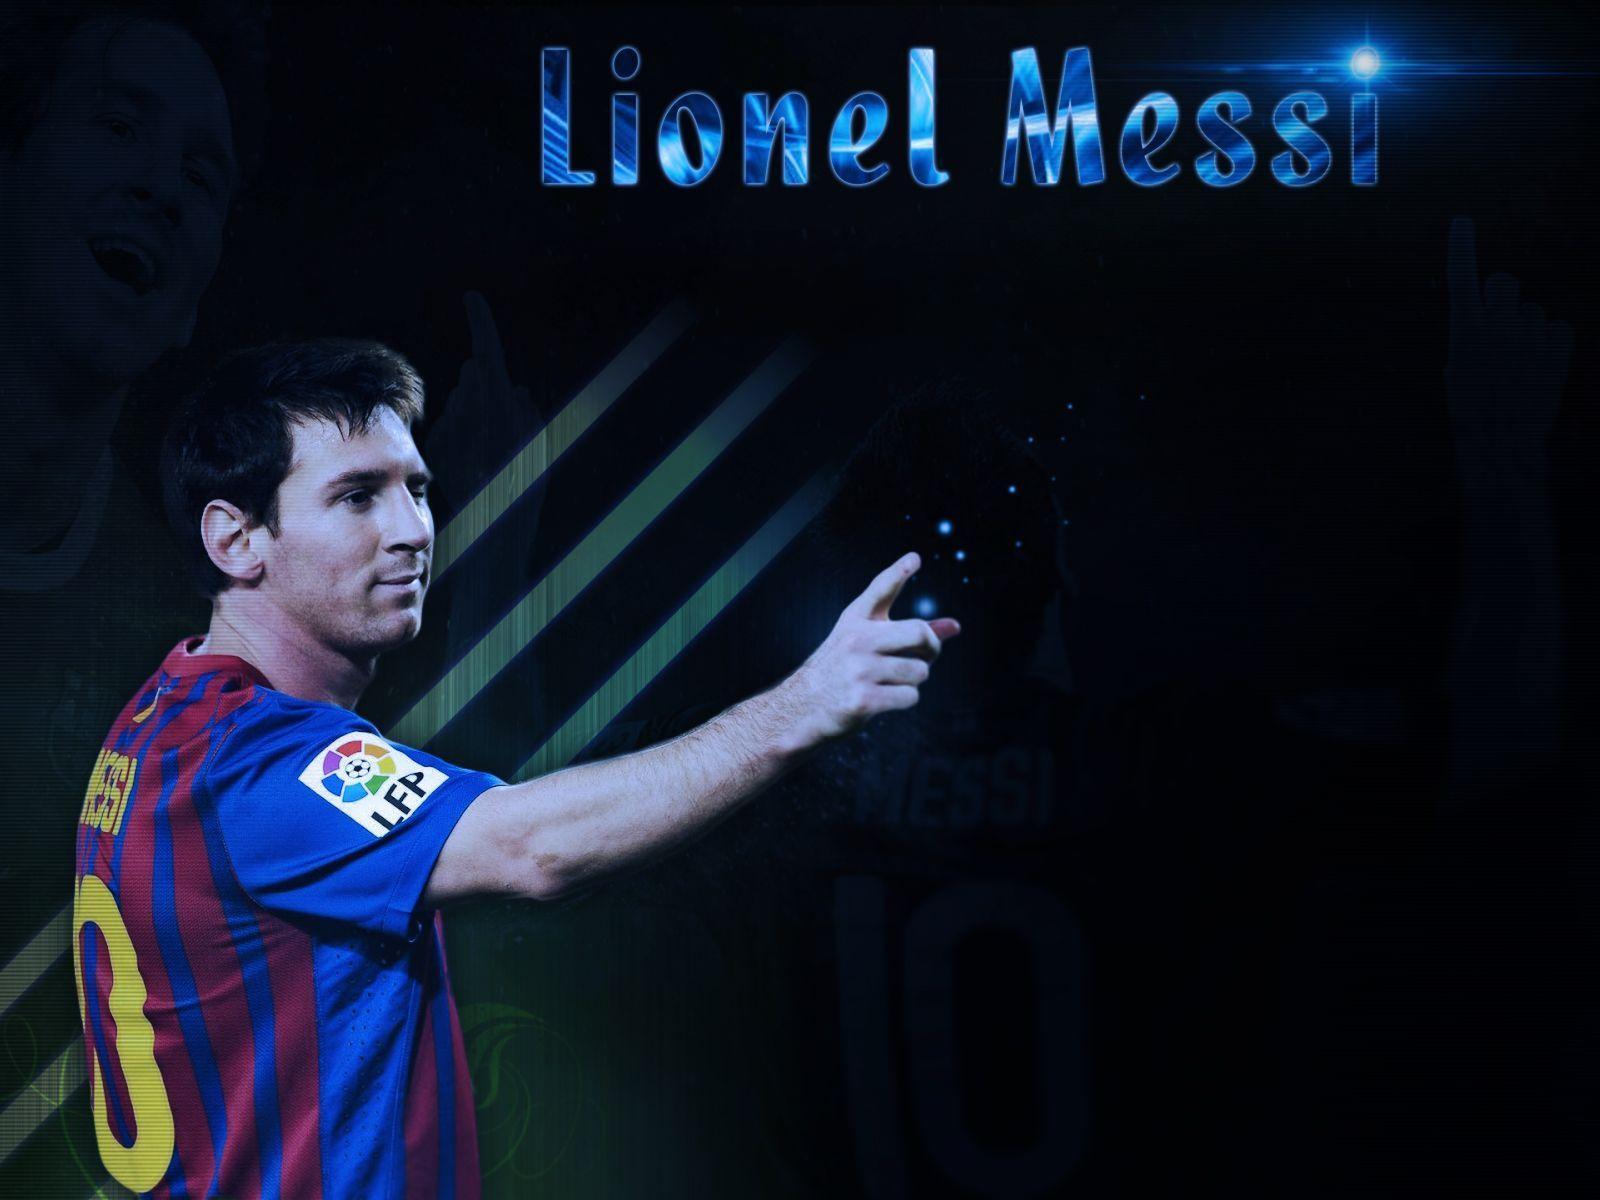 Sports Super Stars Wallpaper, Lionel Messi Pointing at Success